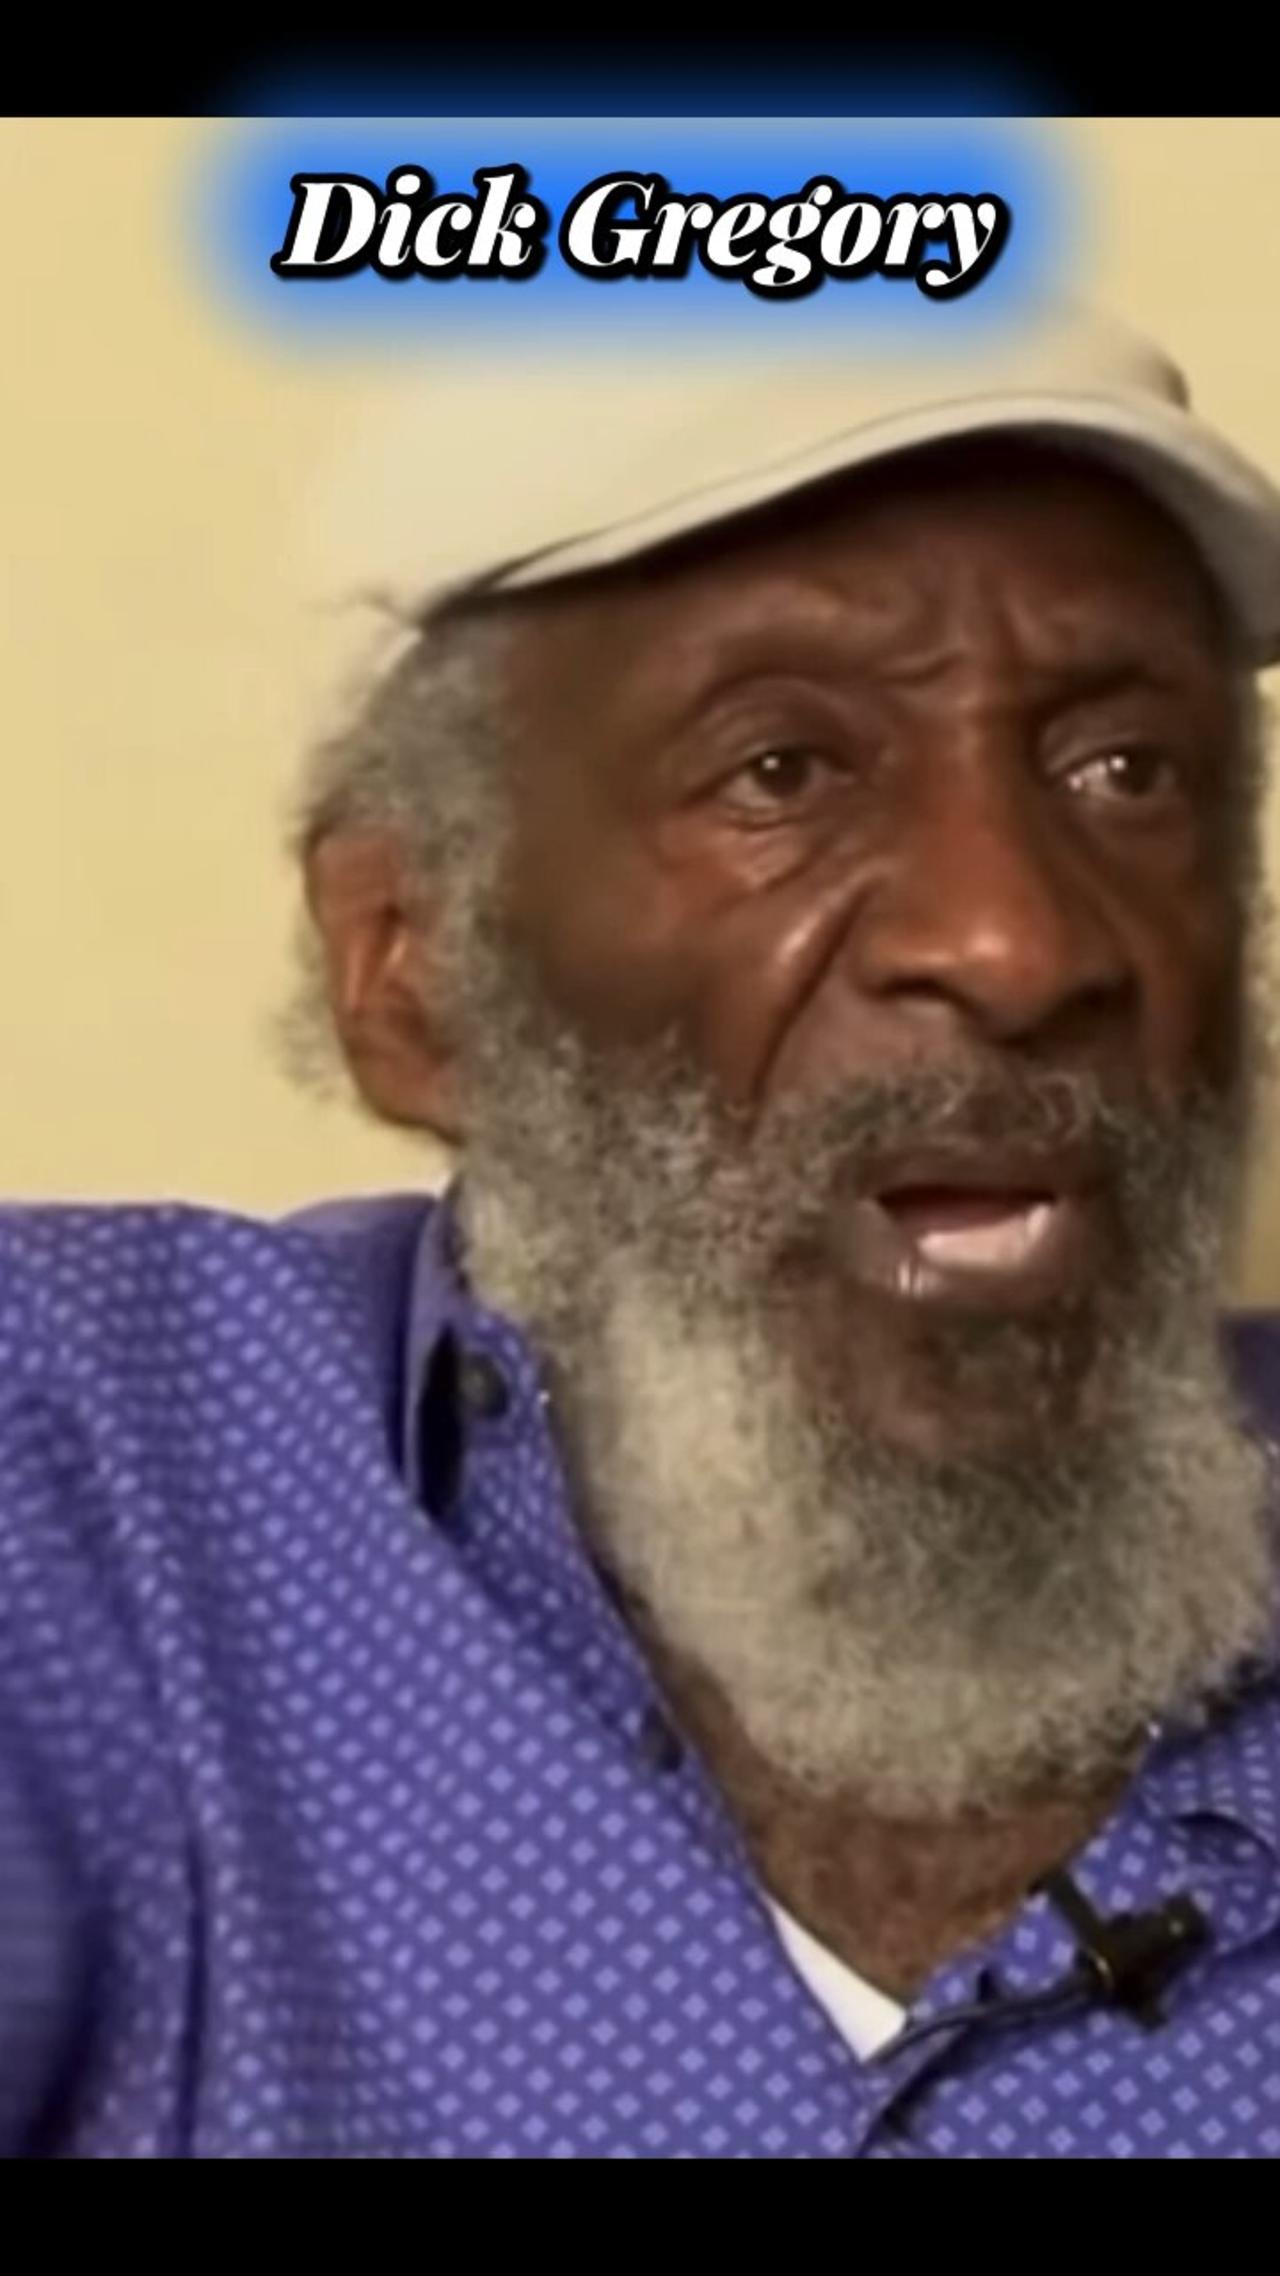 EXCLUSIVE DICK GREGORY INTERVIEW. EXPOSING FLIGHT 370 Malaysia disappearance.  ￼